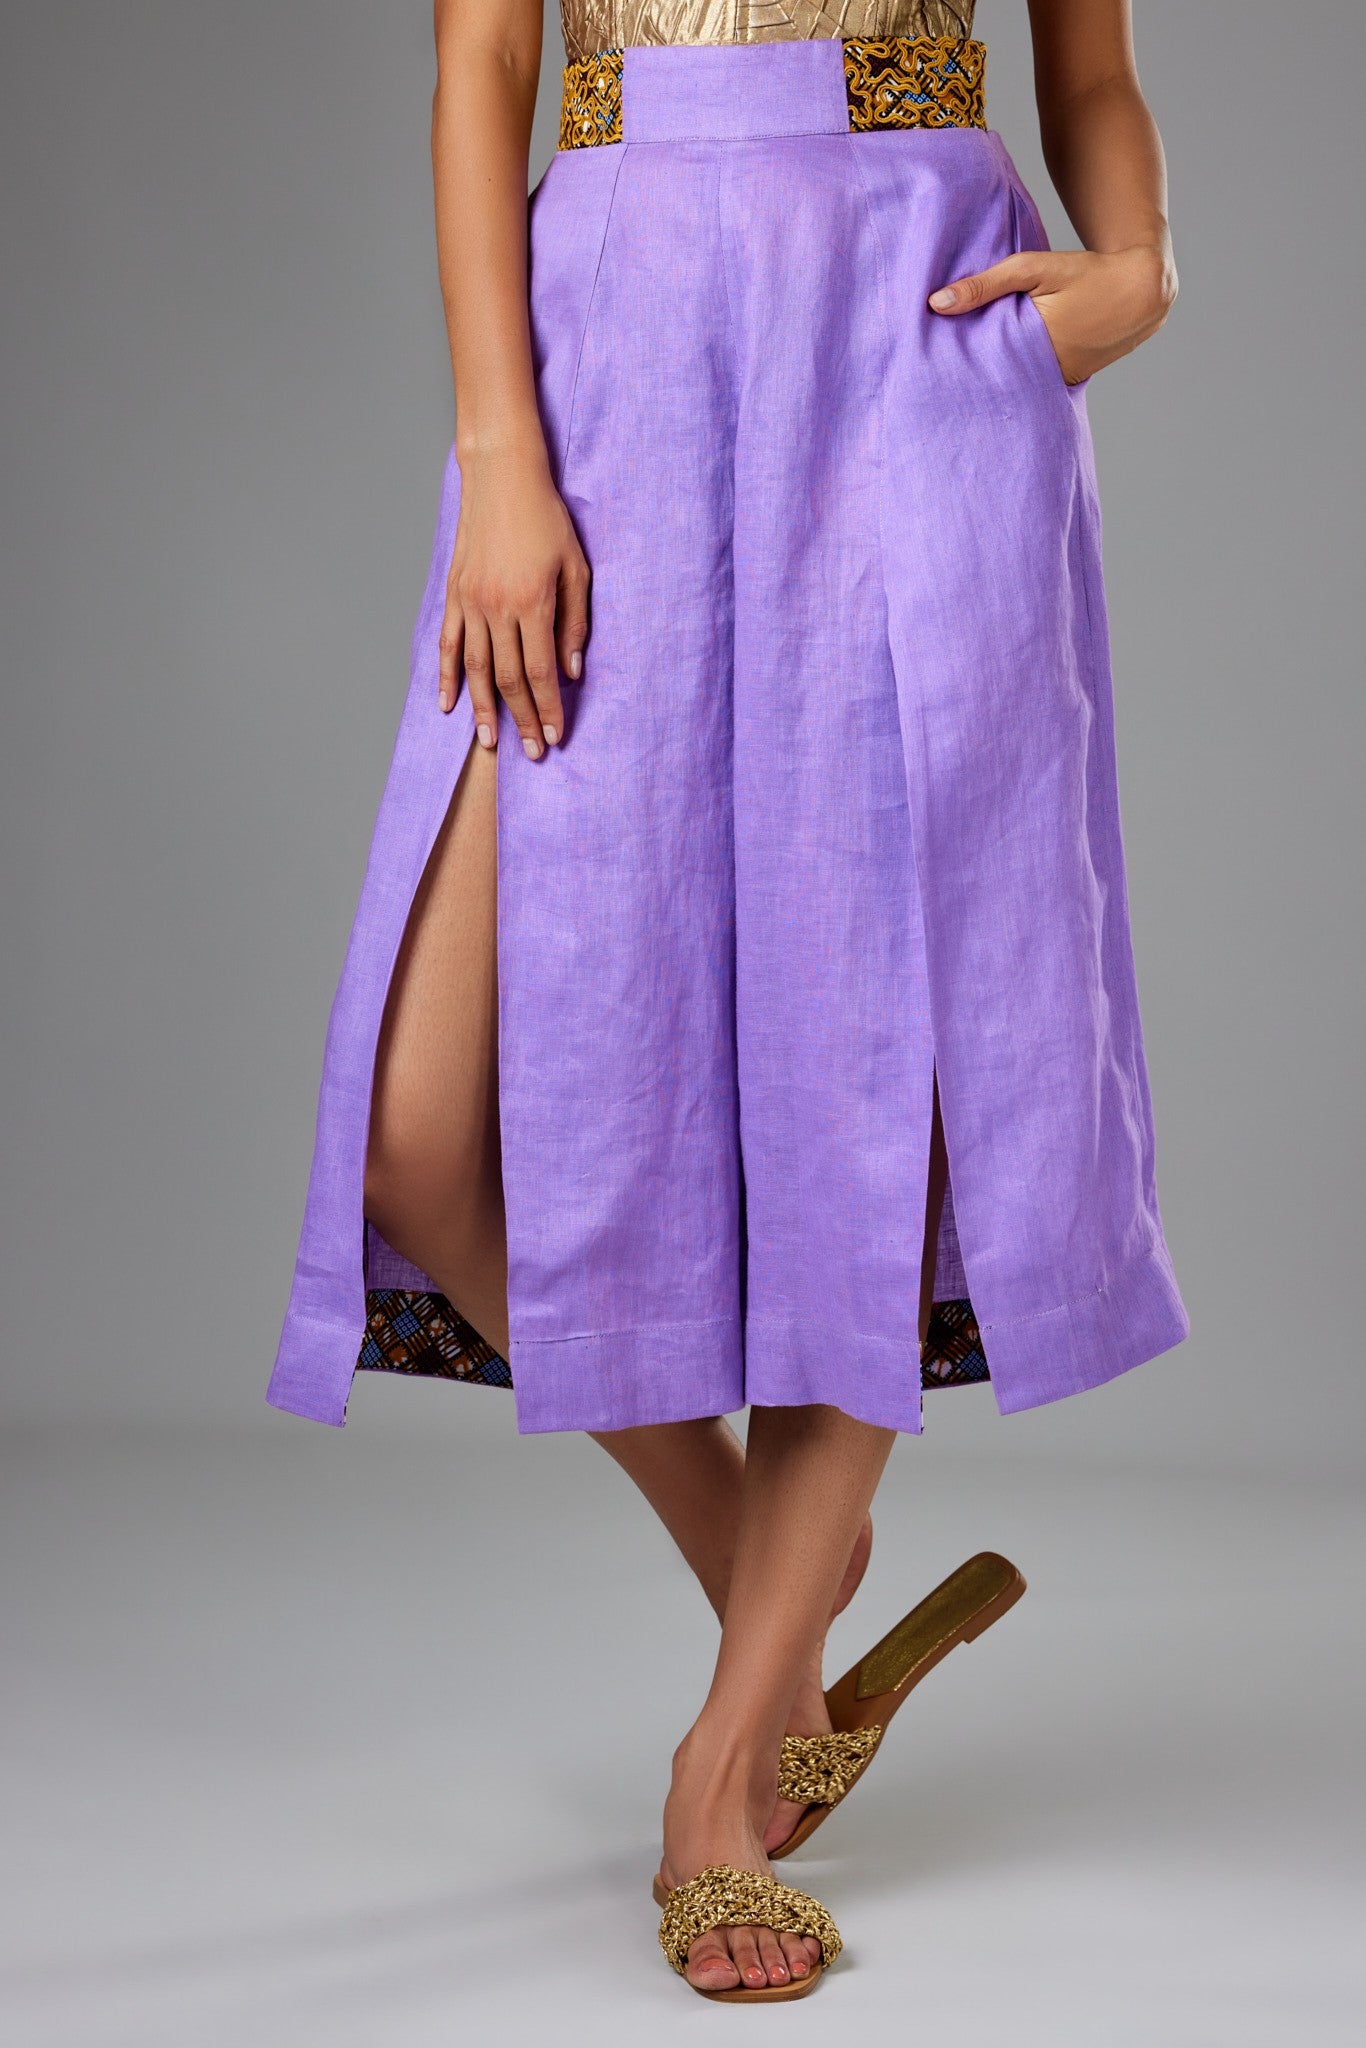 THE LILAC CULOTTES